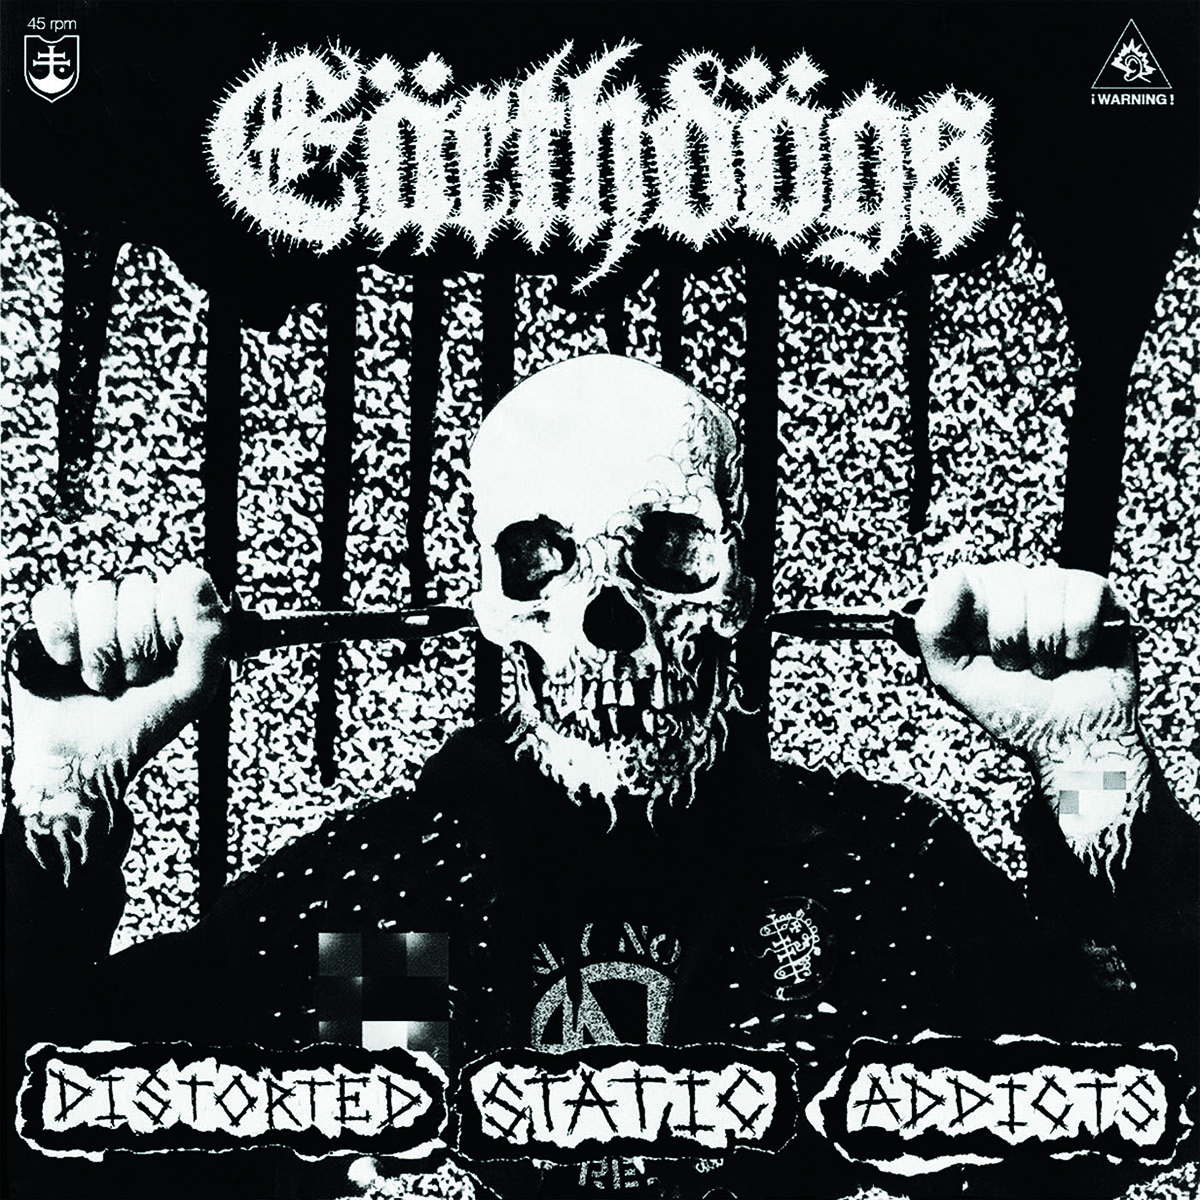 Earthdogs - Distorted Static Addicts 7"